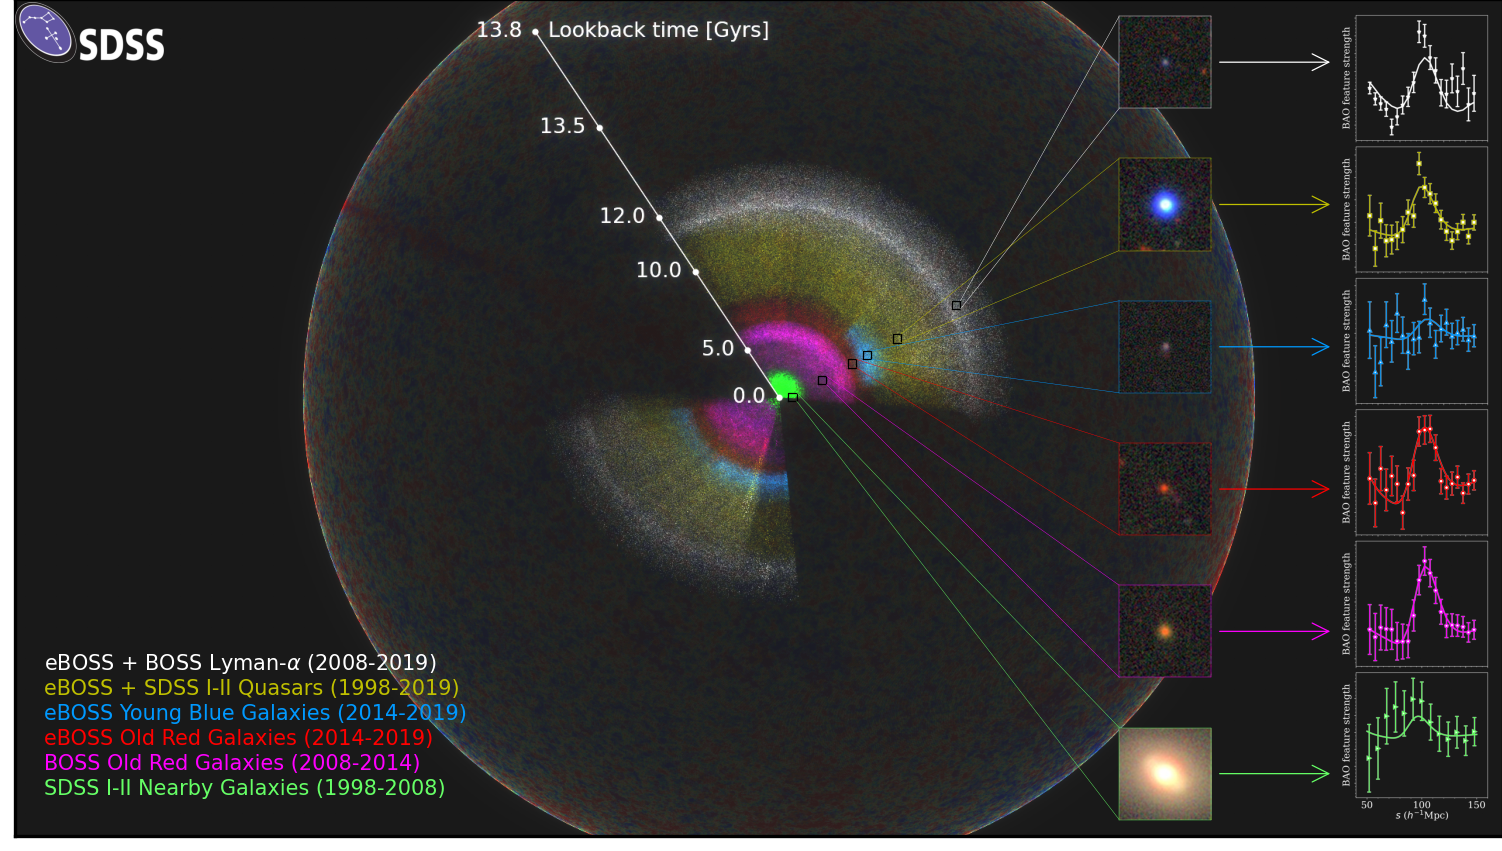 Snapshot of the three-dimensional map of galaxies and quasars observed over four generations of SDSS spectroscopy.  Image credit: Anand Raichoor (EPFL), Ashley Ross (Ohio State University) and the SDSS Collaboration.  A full video rendering of these data can be found in the <a href="https://youtu.be/UTlYUxucEZA">3D visualization</a> appropriate for scientific presentations.
